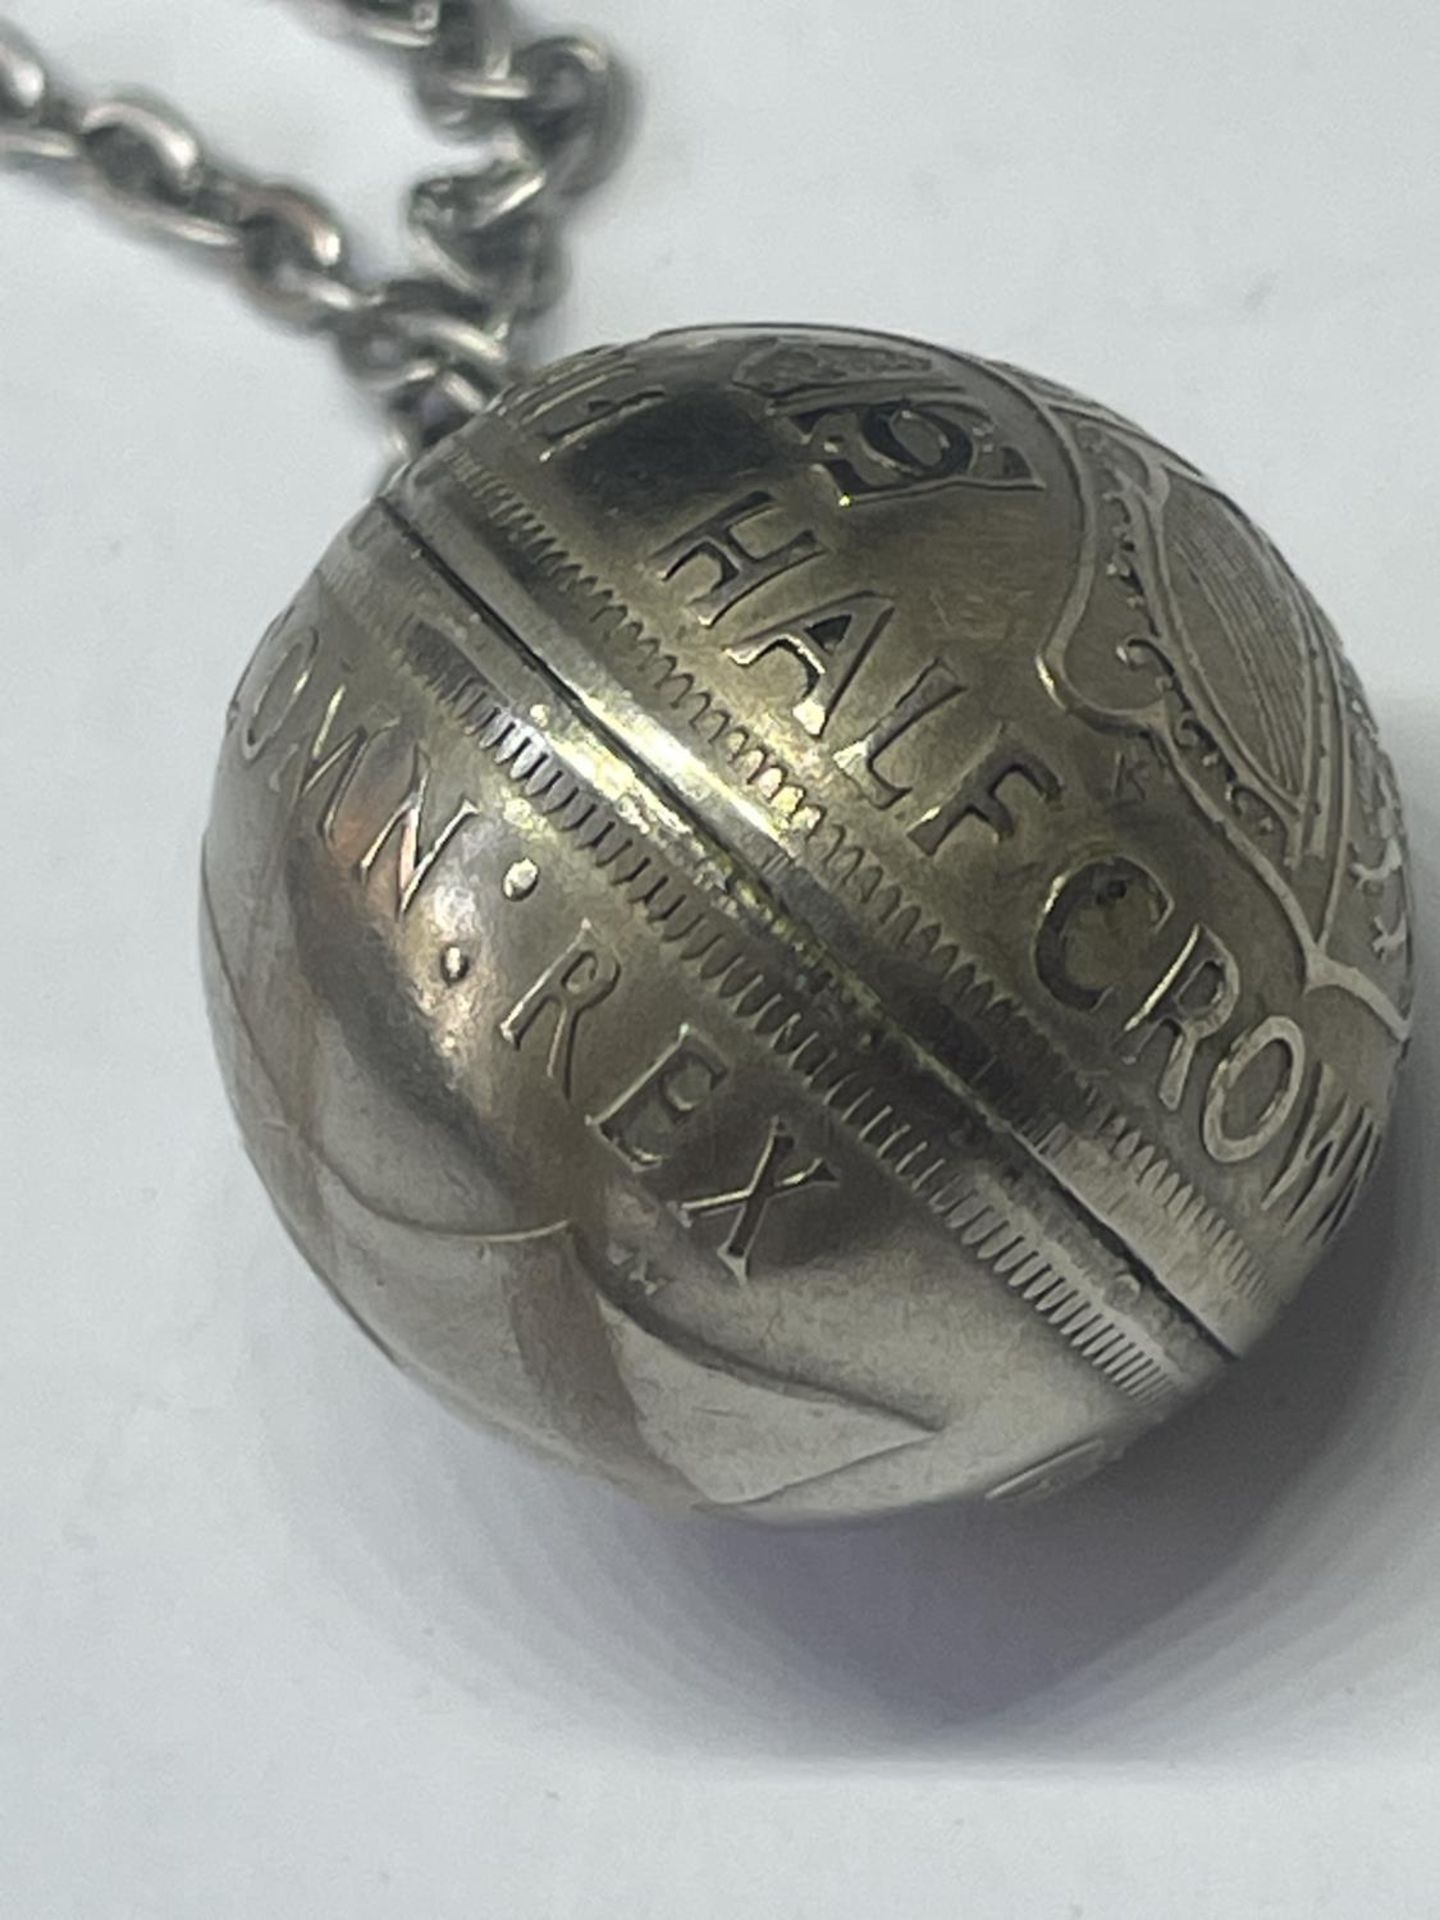 A SILVER NECKLACE AND A HALF CROWN BALL PENDANT - Image 2 of 4